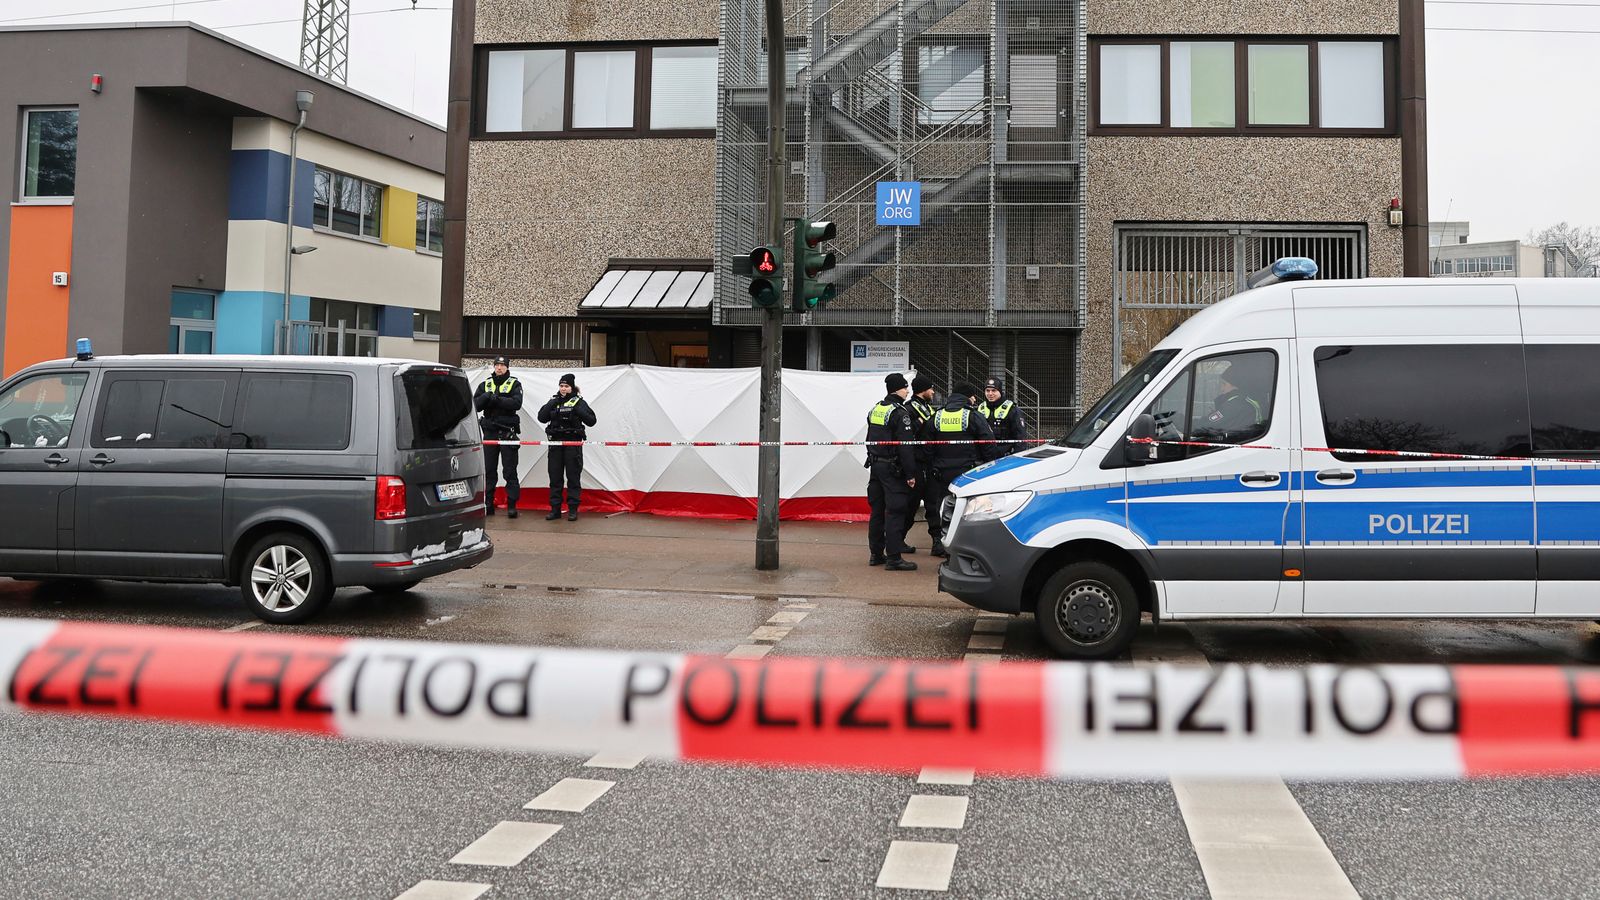 Hamburg shooting: Unborn baby among those killed at Jehovah's Witness building